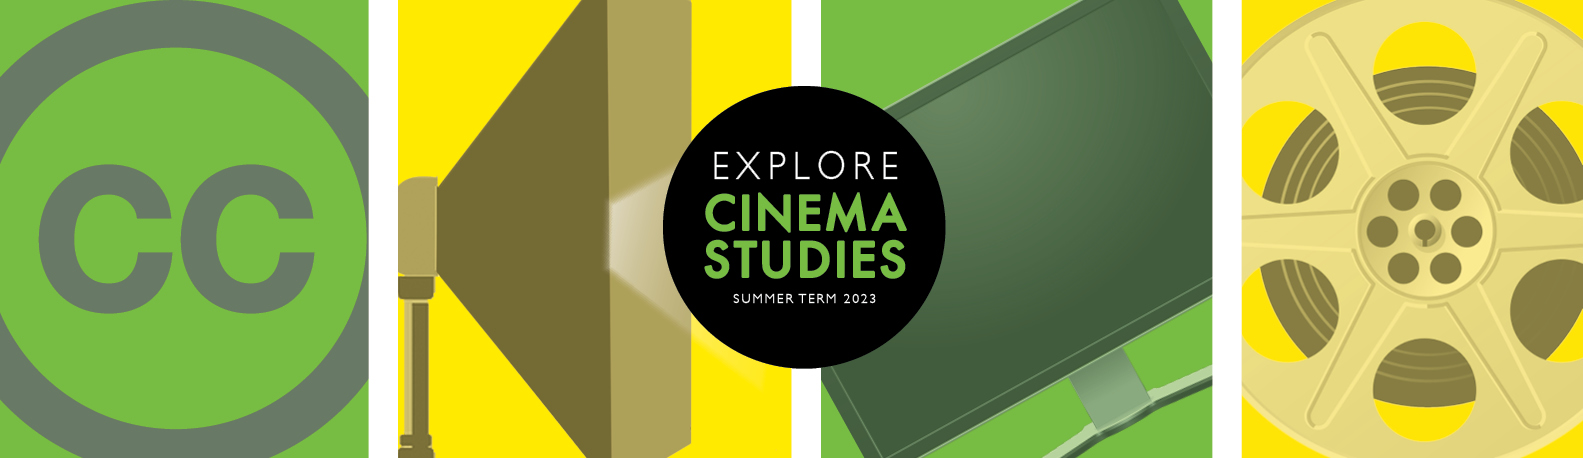 Study Cinema in the Summer!